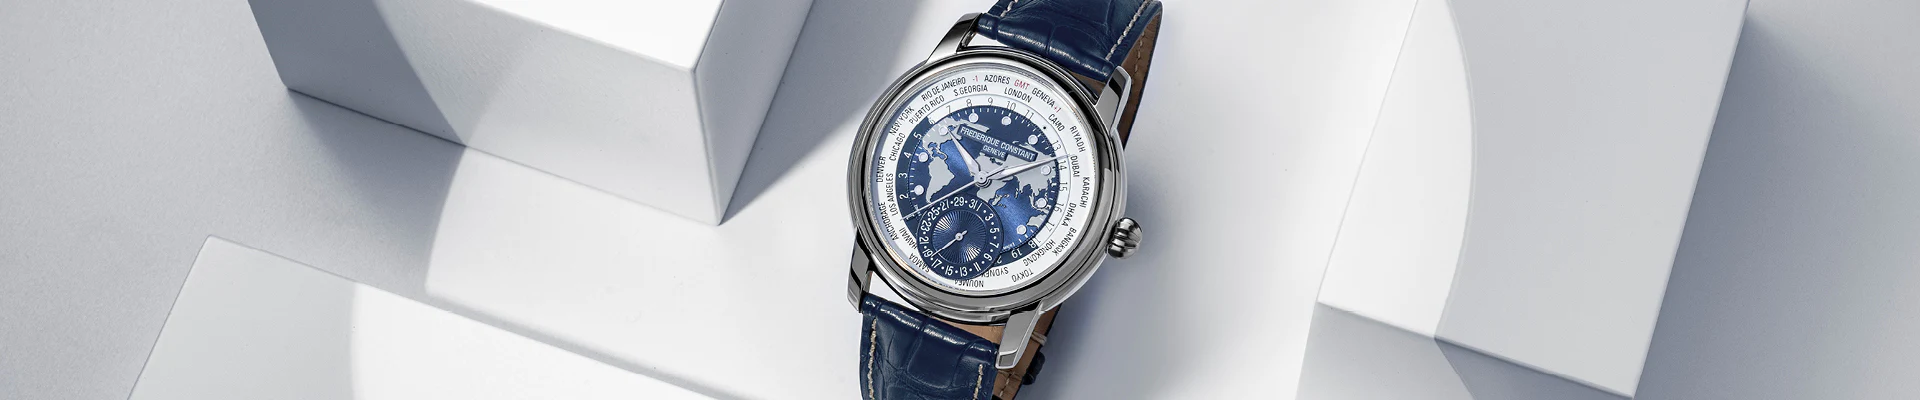 Worldtimer Manufacture watch for man. Automatic movement, grey and blue dial, stainless-steel case, date counter, worldtimer and blue leather strap 